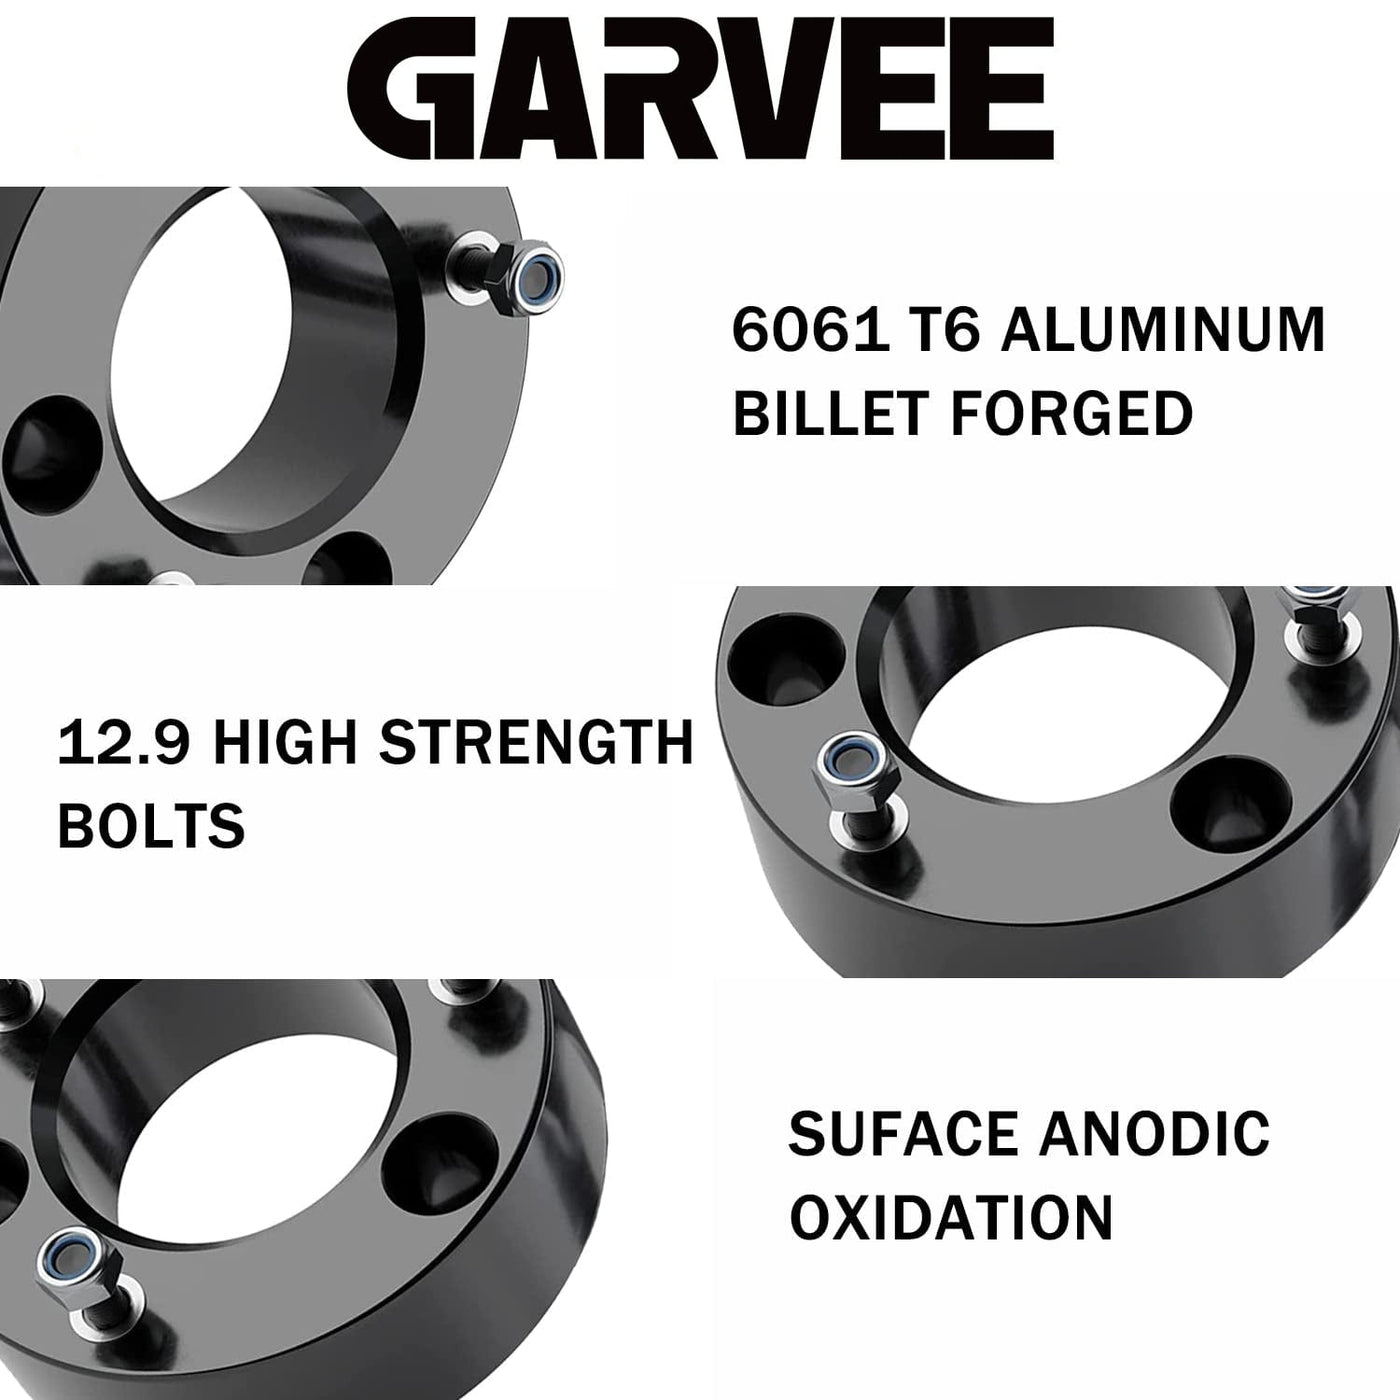 GARVEE 2.5 inch Ram 1500 Front Leveling Kits Front Strut Spacers Lift Kit for 2006-2021 Ram 1500 4WD